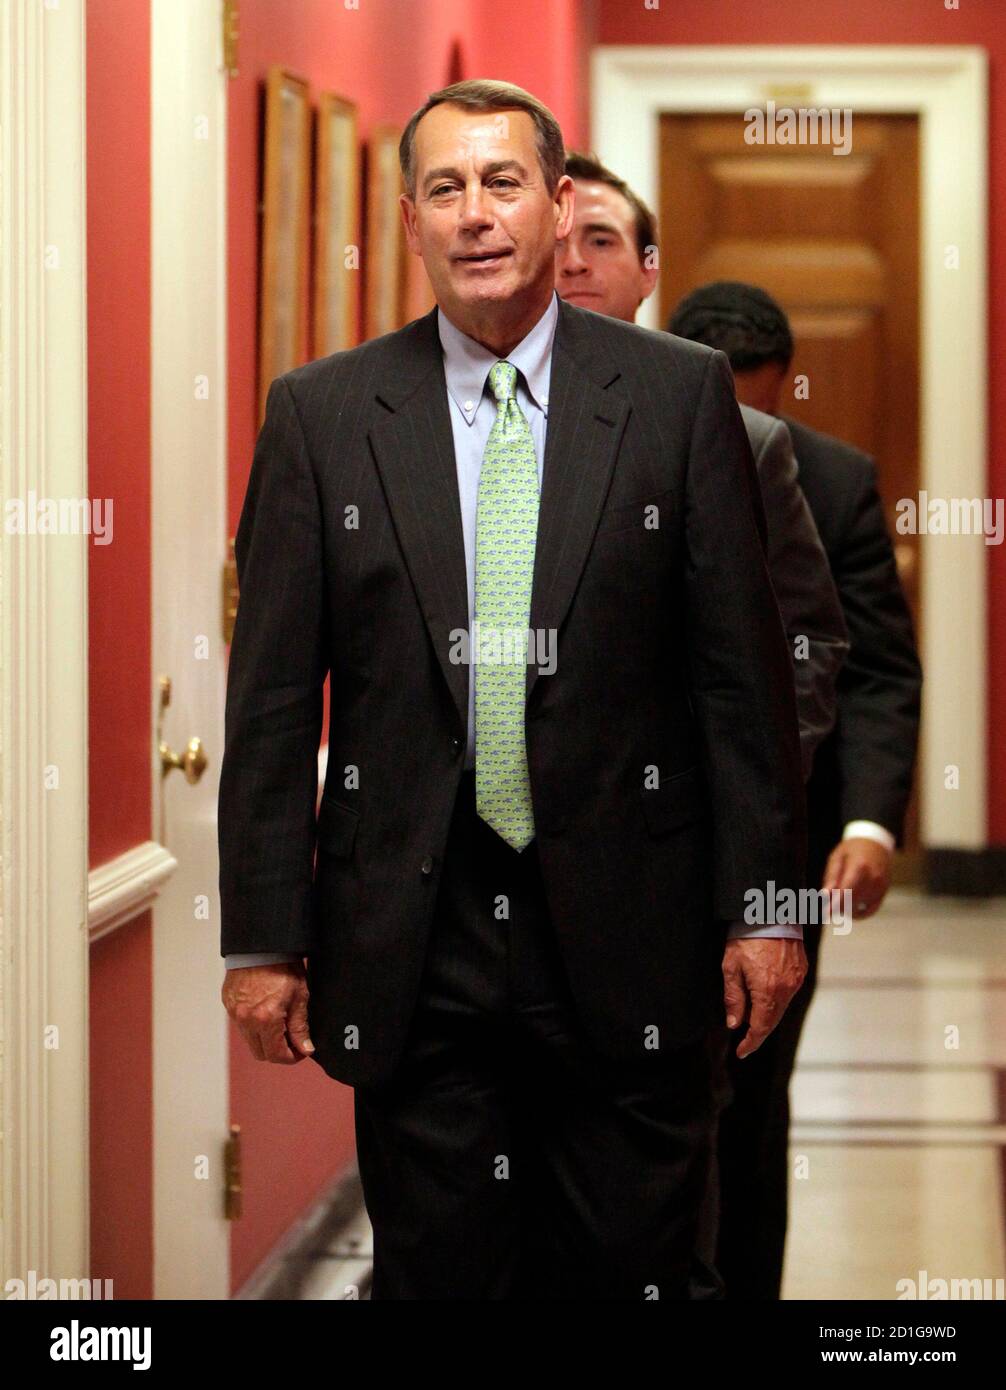 U.S. House Minority Leader John Boehner (R-OH) walks after the House vote on health care reform on Capitol Hill in Washington November 7, 2009. The U.S. House of Representatives approved a sweeping healthcare reform bill on Saturday, backing the biggest health policy changes in four decades and handing President Barack Obama a crucial victory. REUTERS/Yuri Gripas (UNITED STATES POLITICS HEALTH) Stock Photo